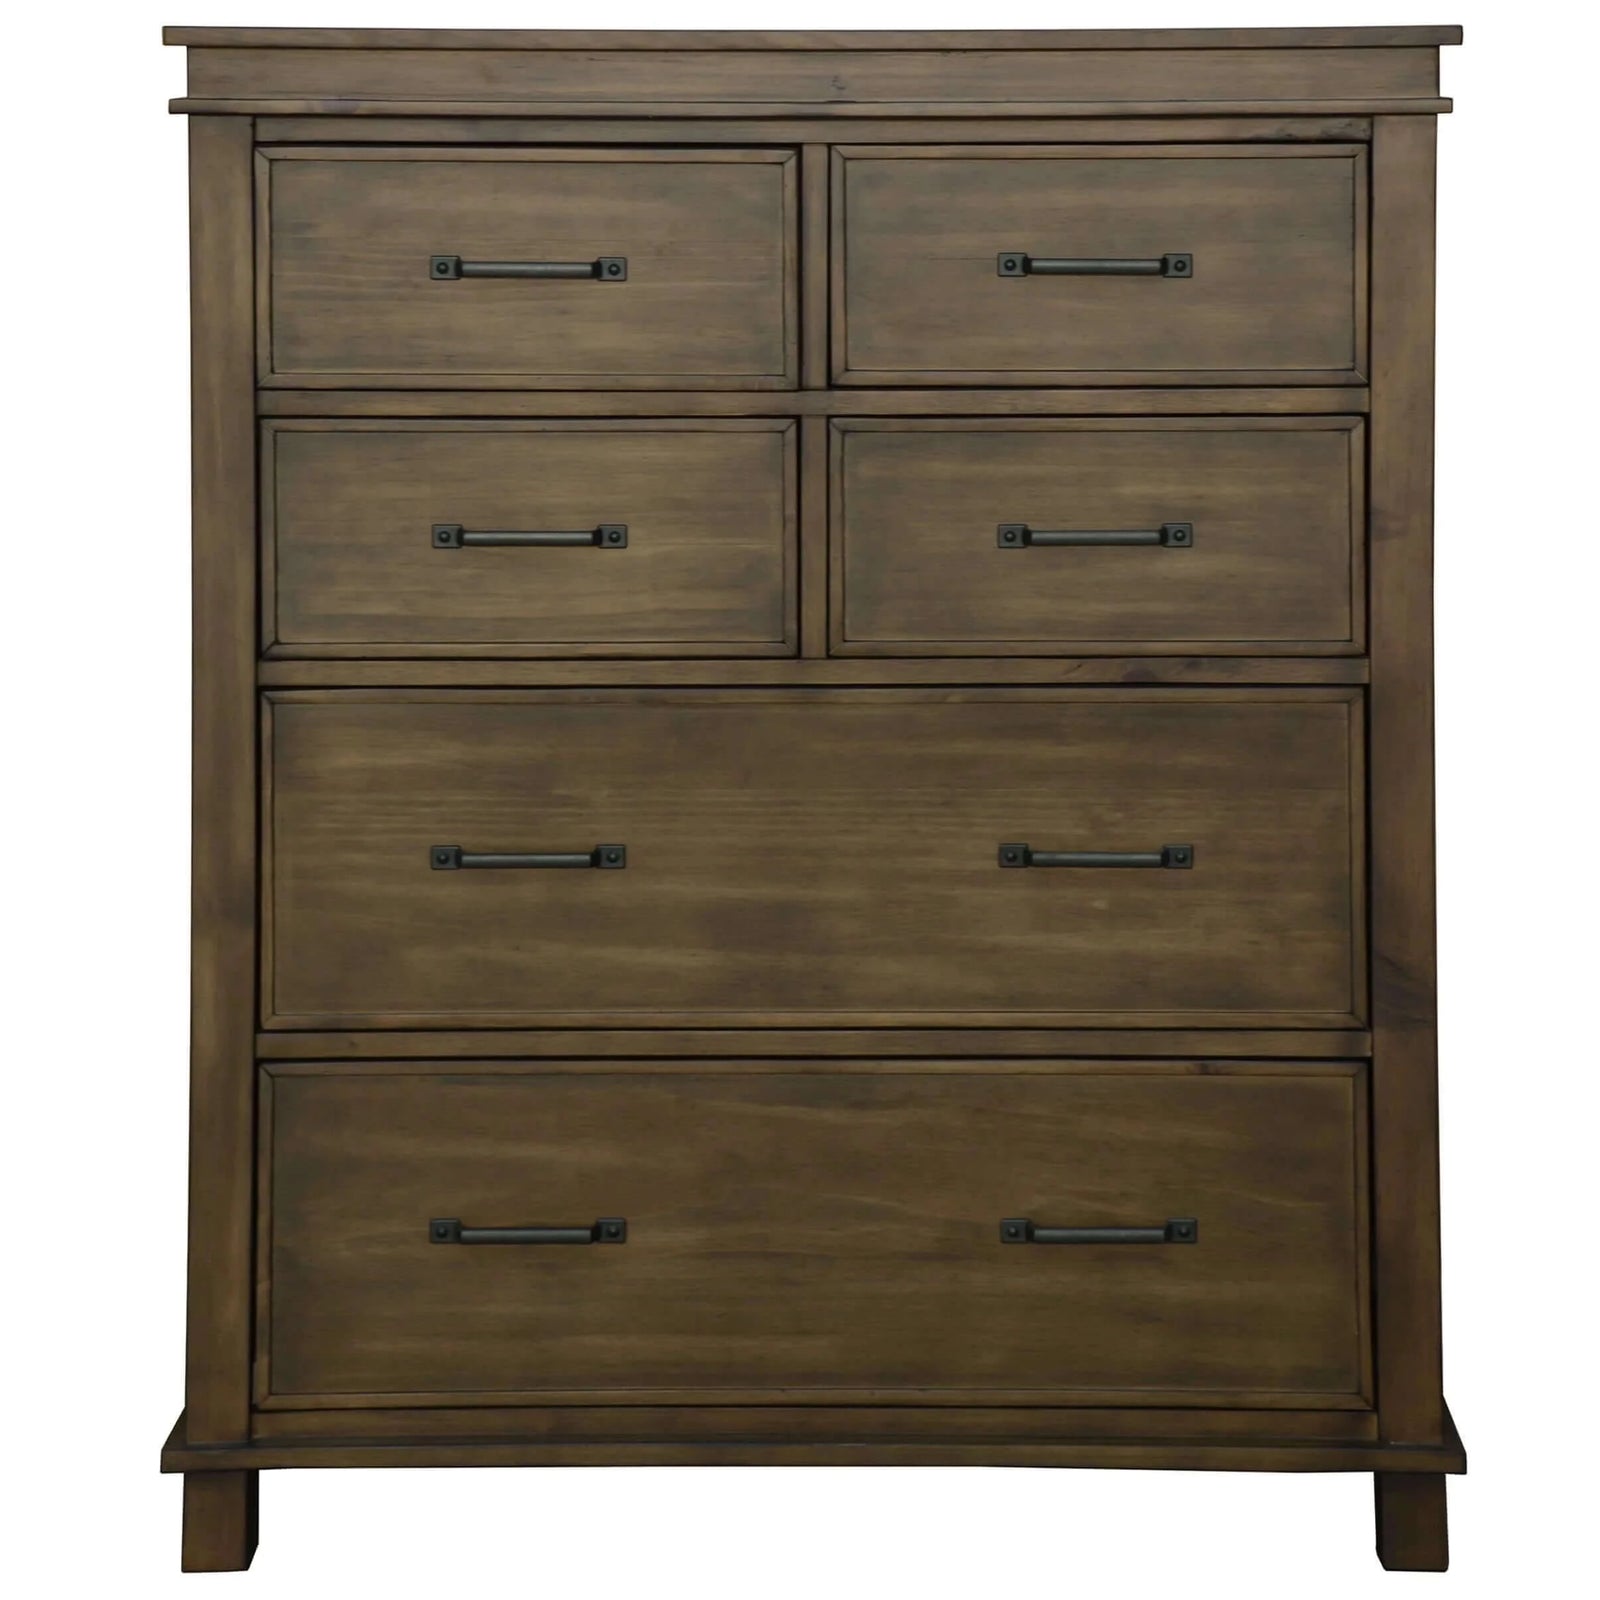 Buy lily tallboy 6 chest of drawers solid pine wood bed storage cabinet -rustic grey - upinteriors-Upinteriors